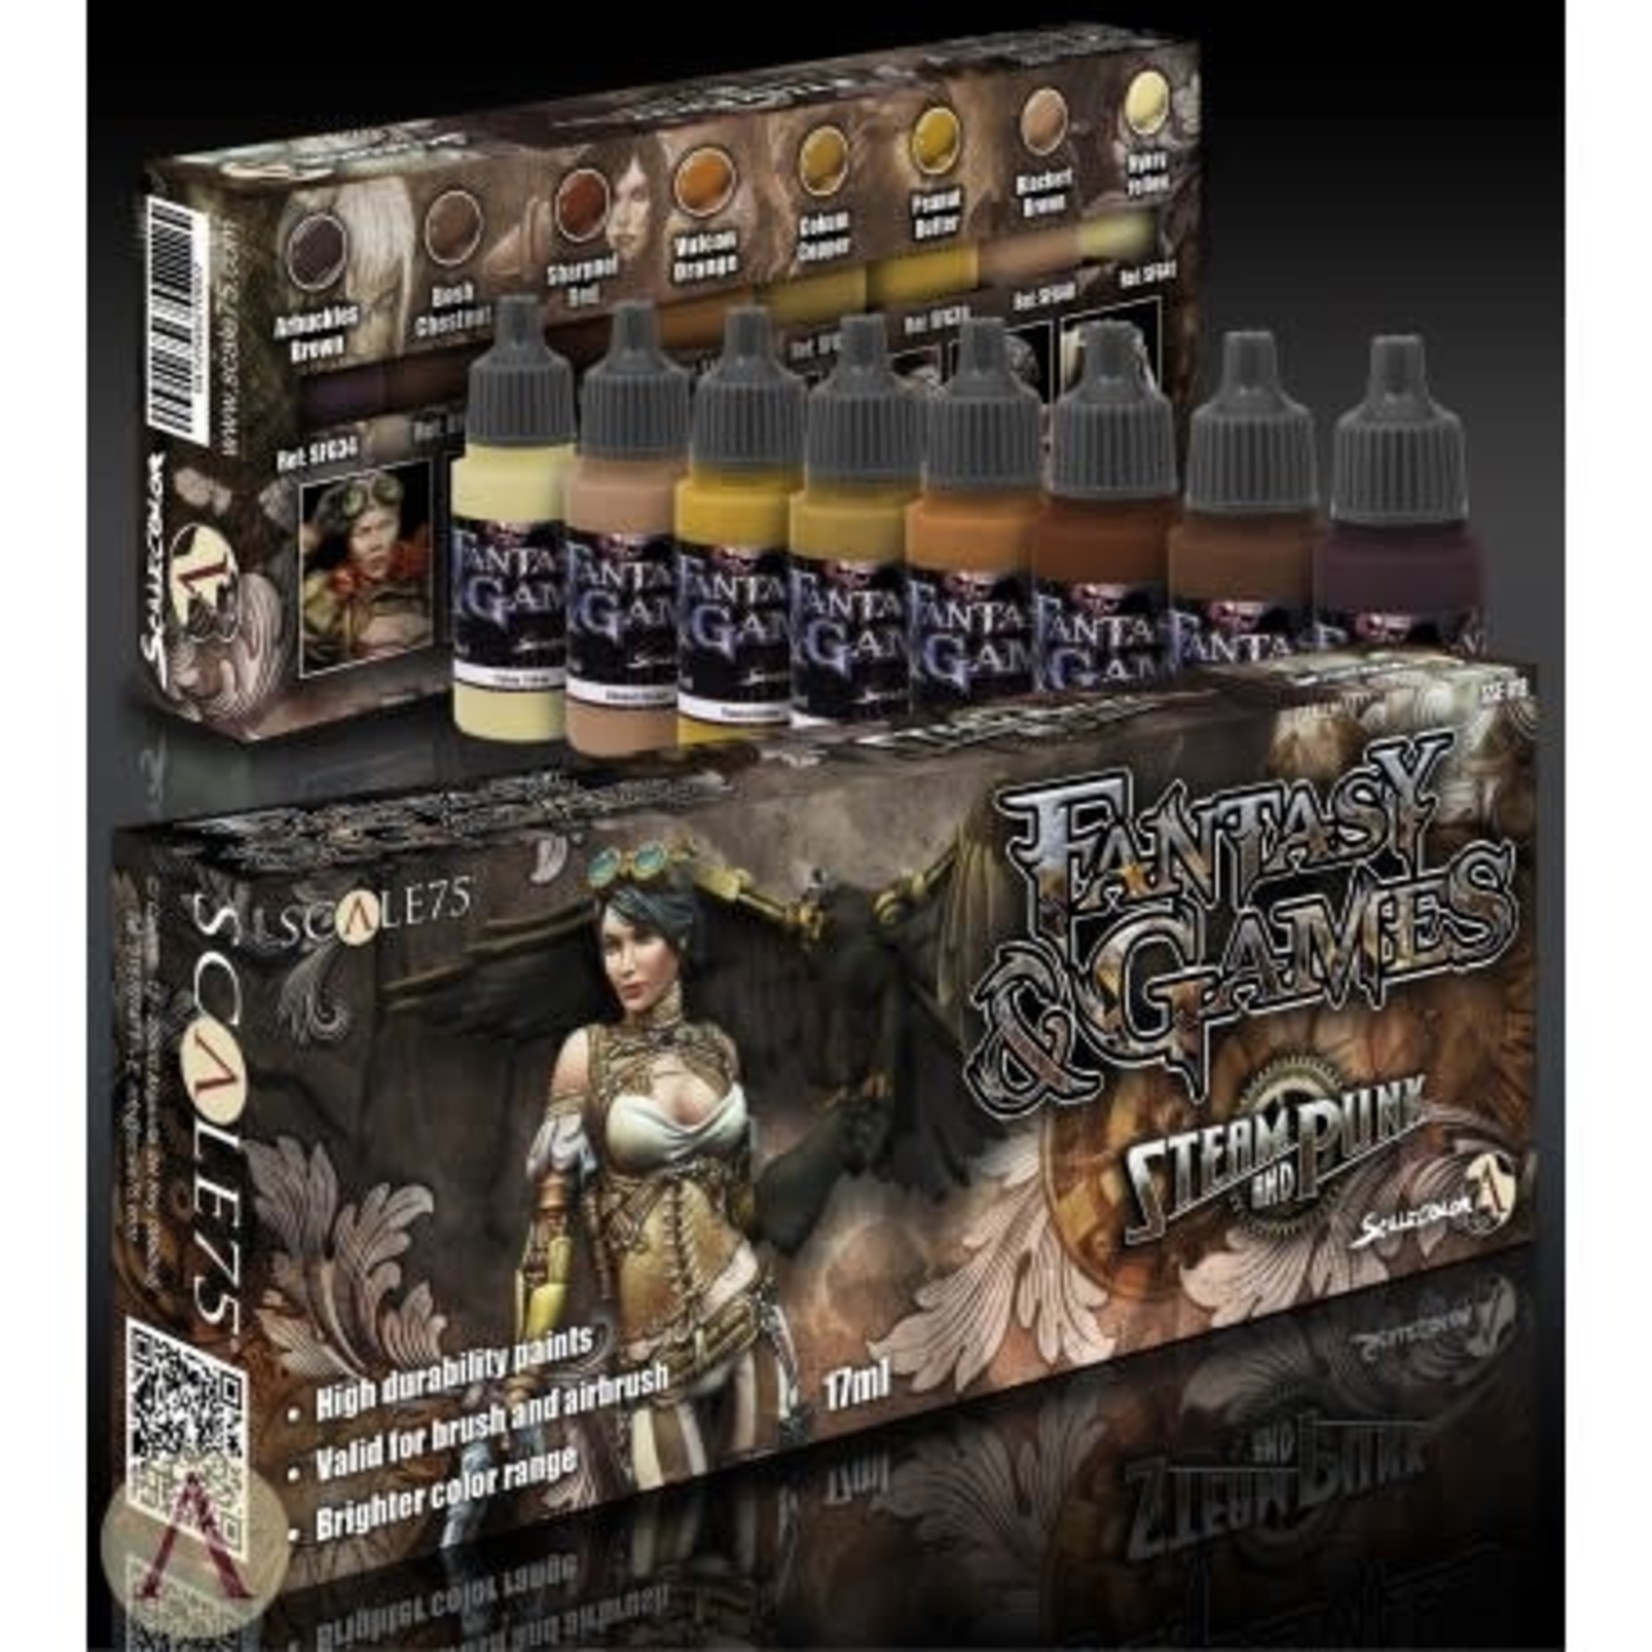 Scale 75 Fantasy and Games SSE018 Steam and Punk Paint (8) Set